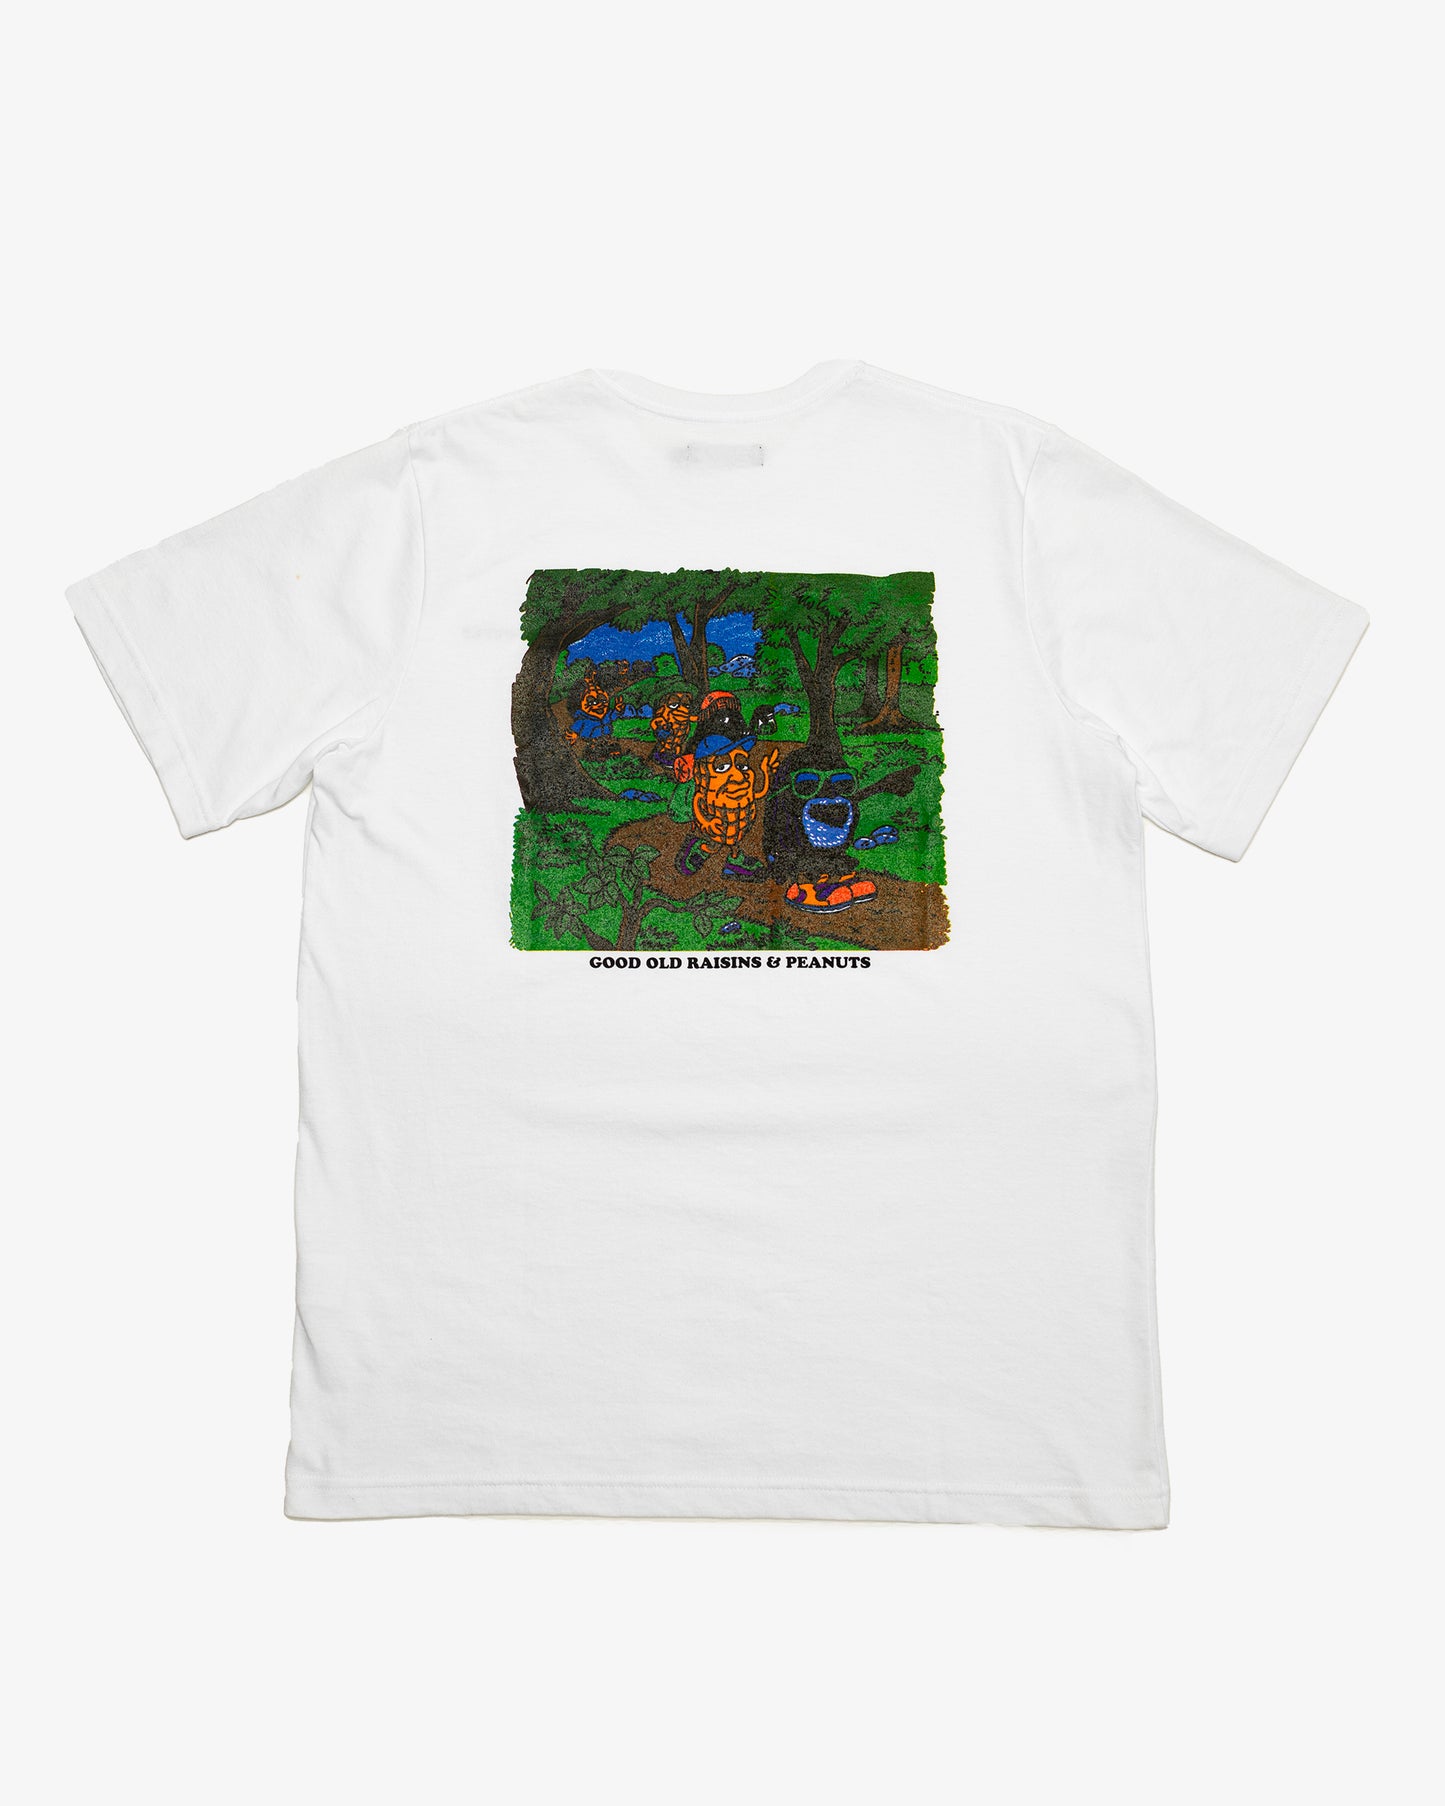 RAISED BY WOLVES - GORP TEE